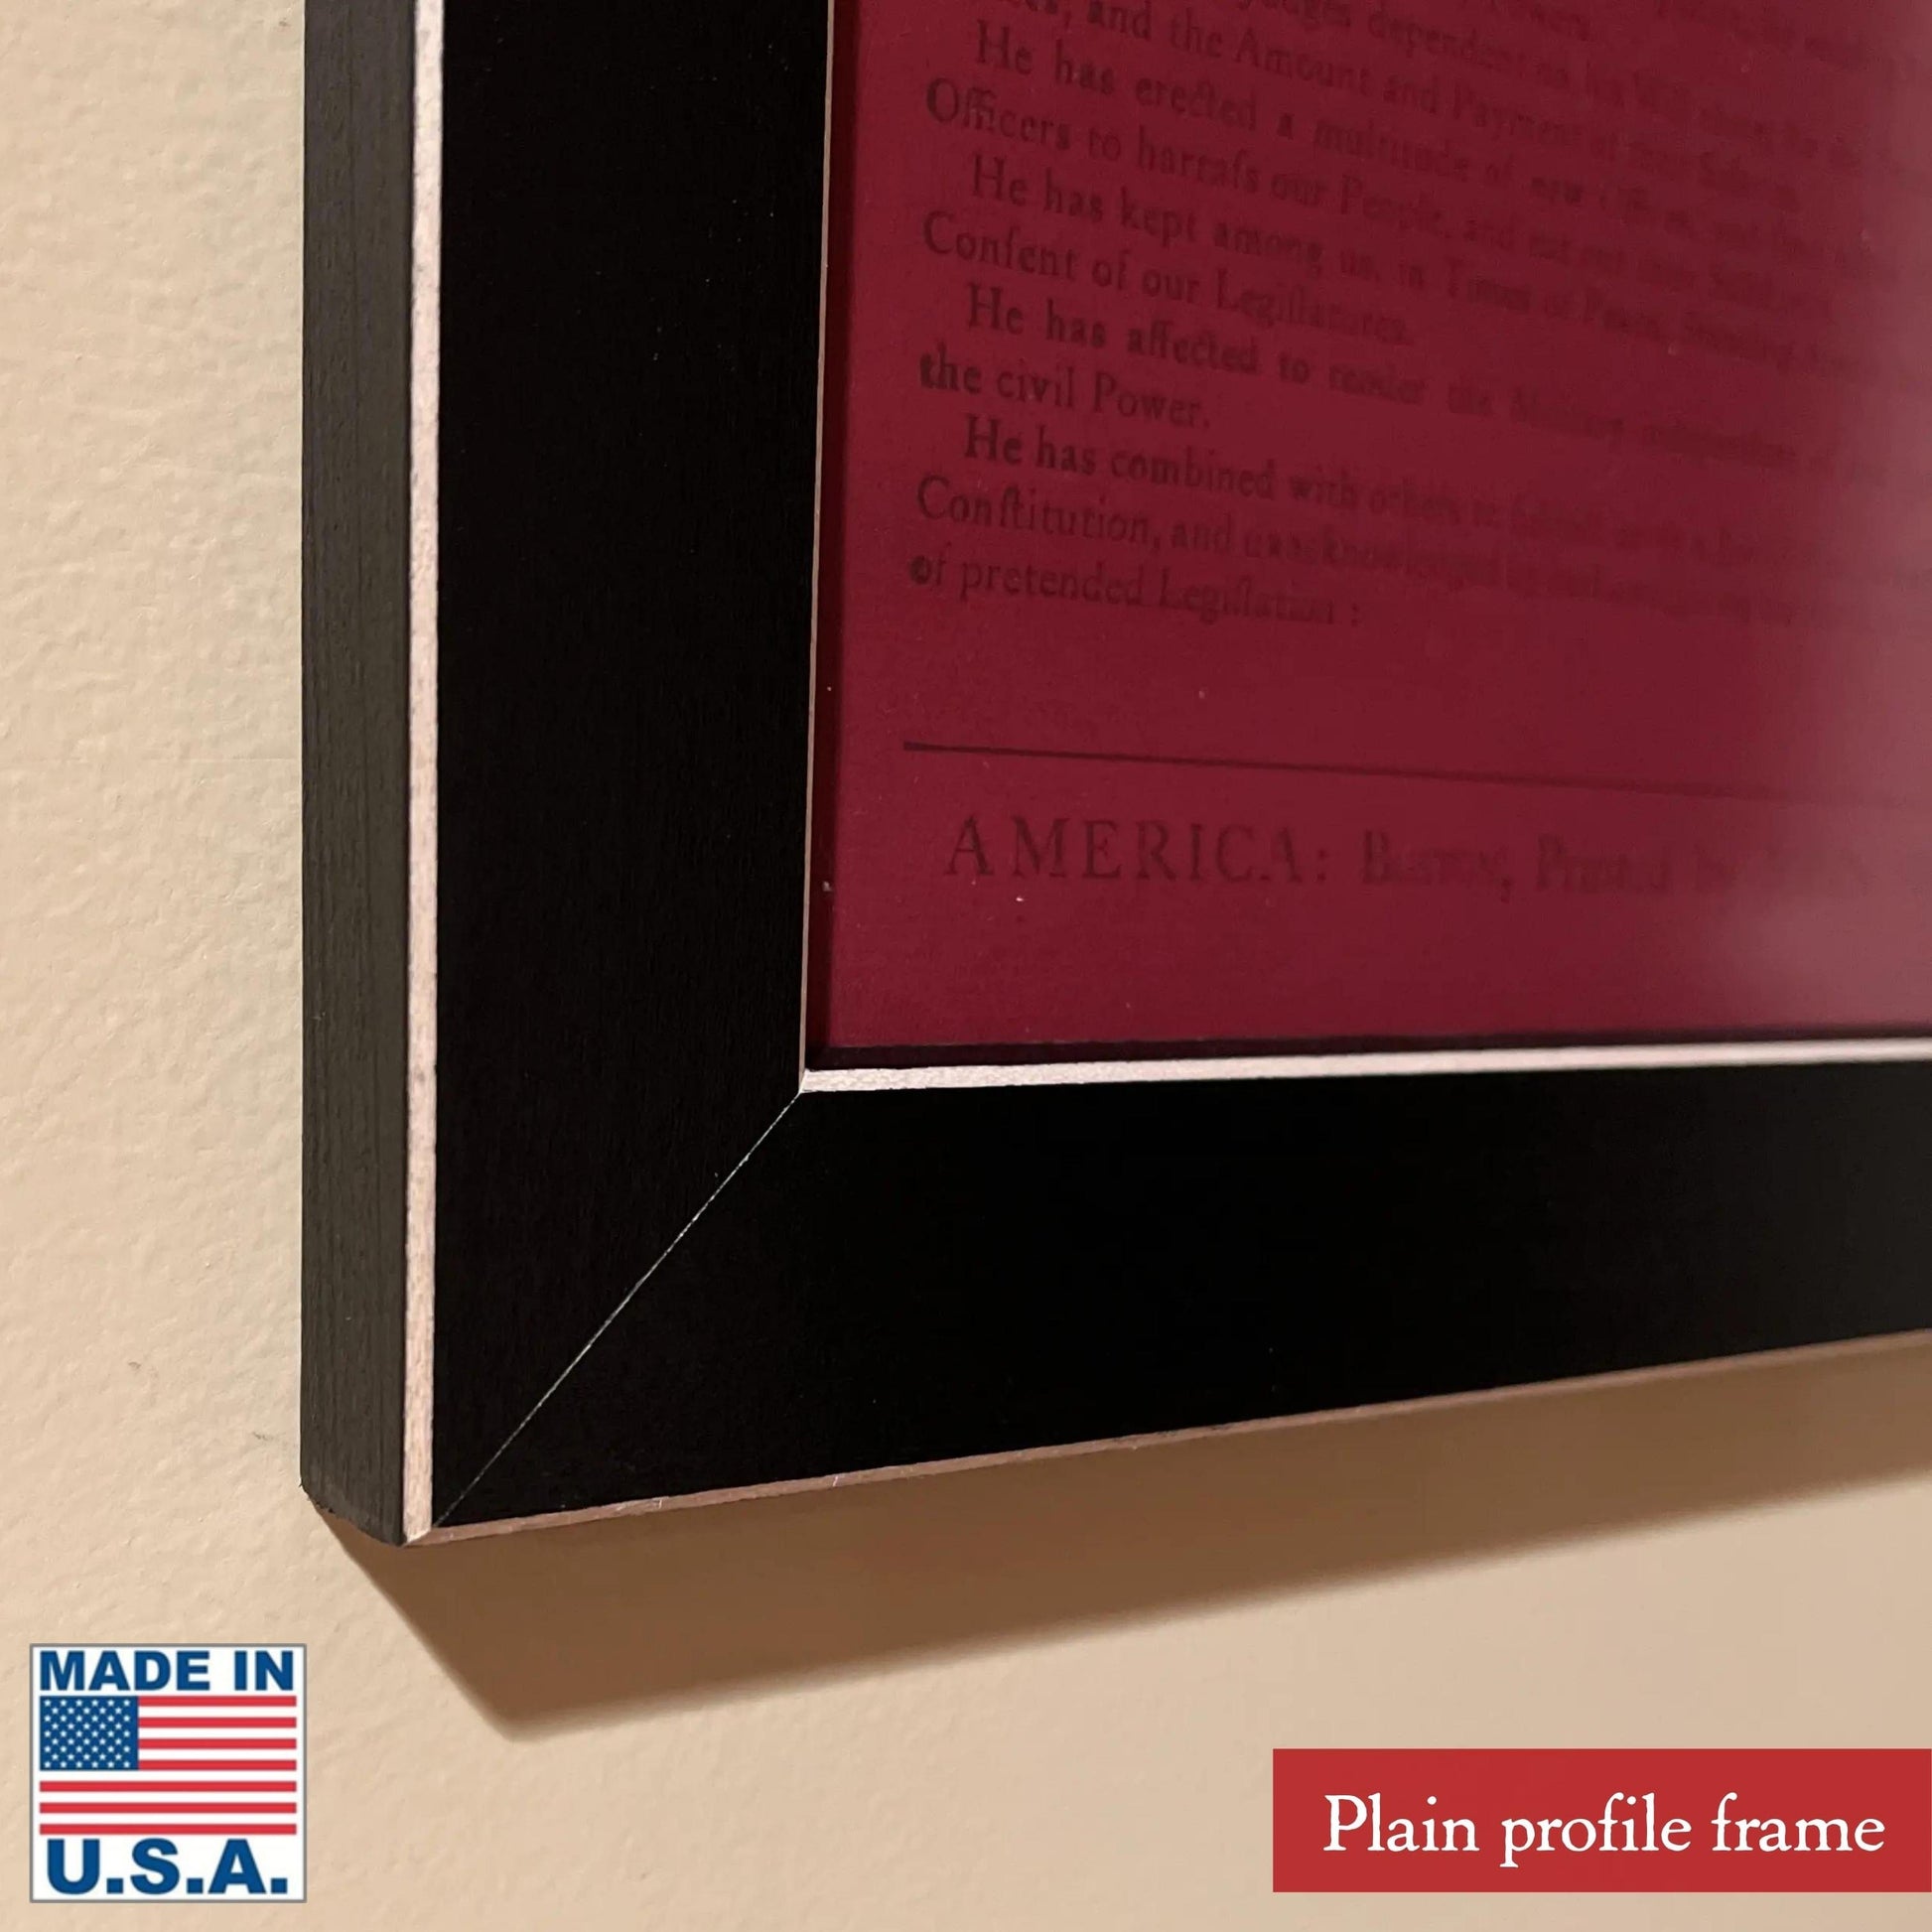 Edge of plain profile frame of "Proclaim Liberty” on a Boston broadside of the Declaration of Independence from The History List store